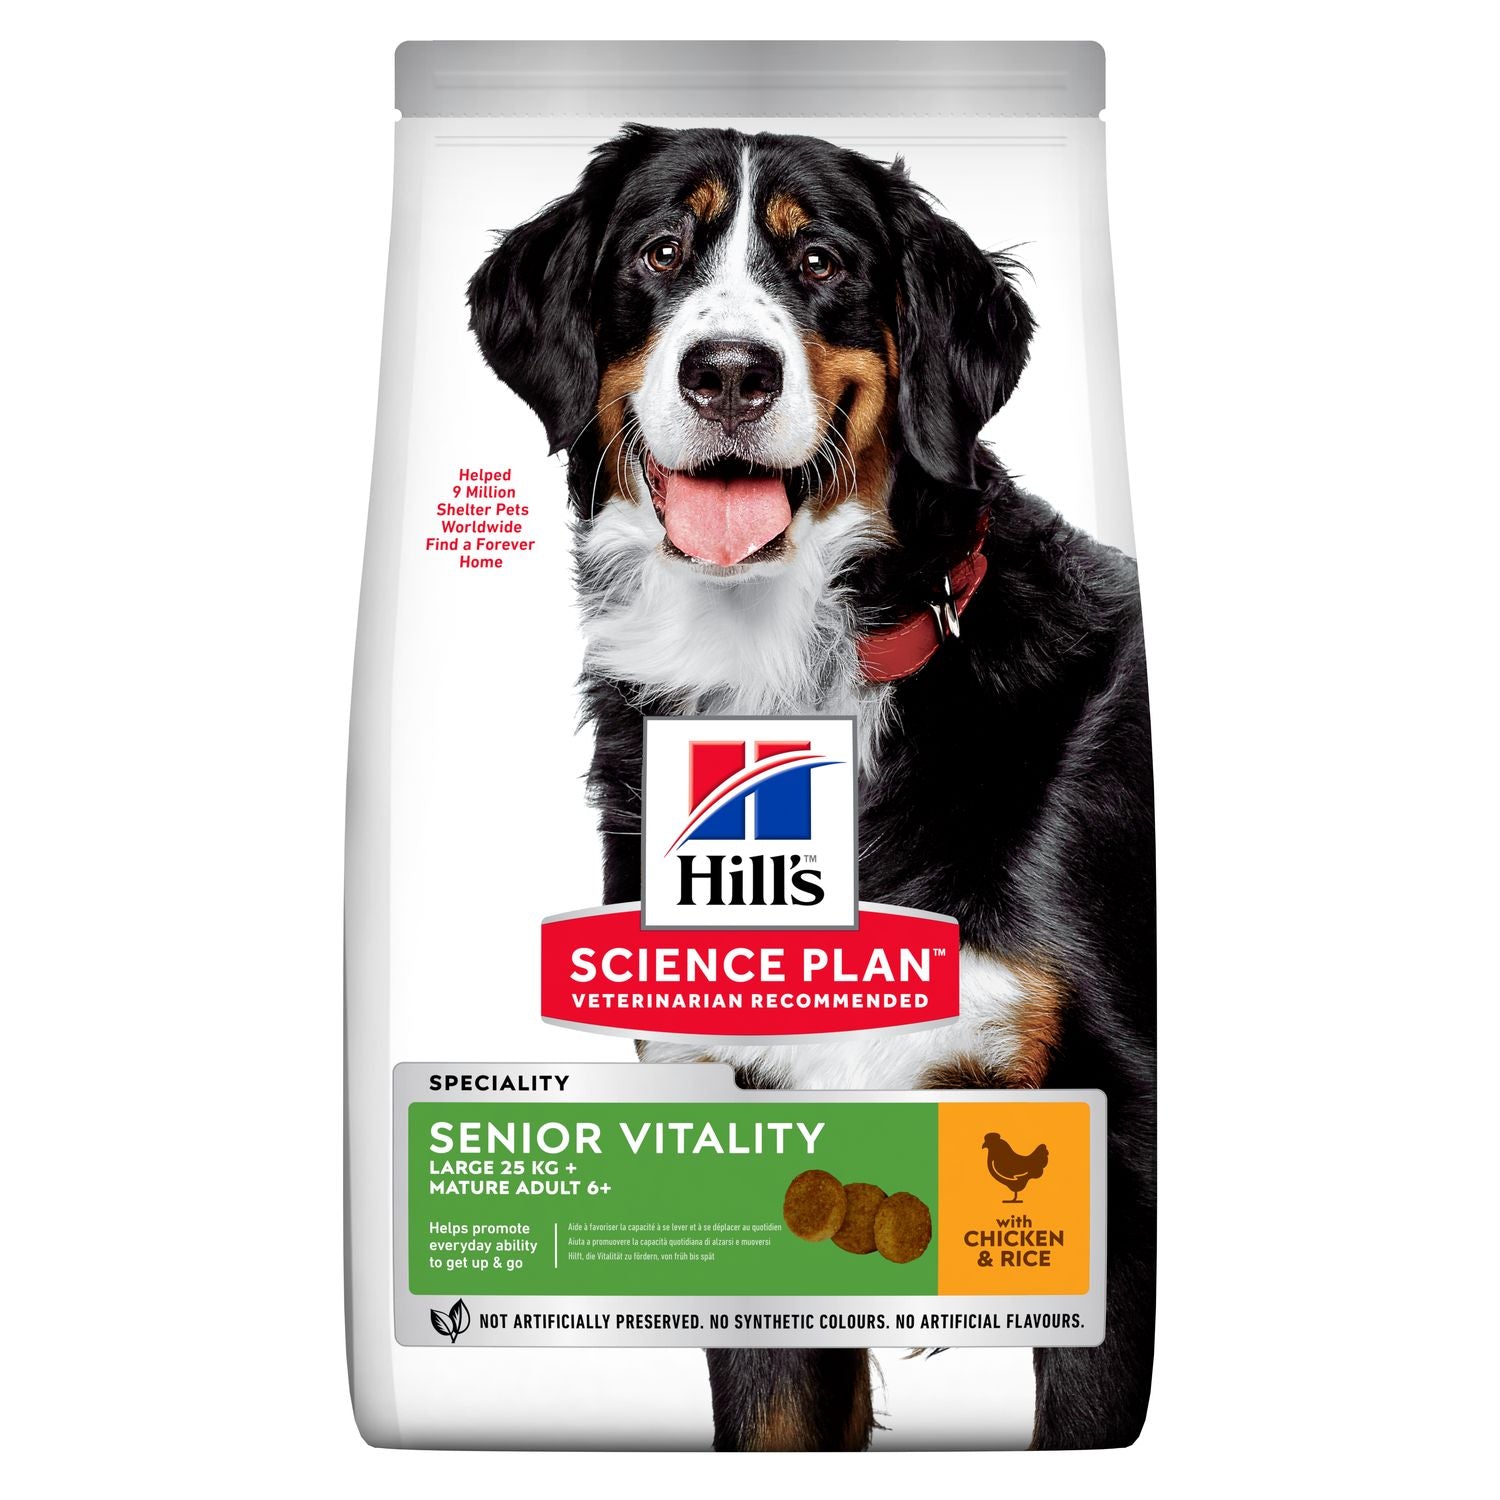 Hill's Science Plan Senior Vitality Large Breed Mature Adult 6+ Dog Food with Chicken & Rice